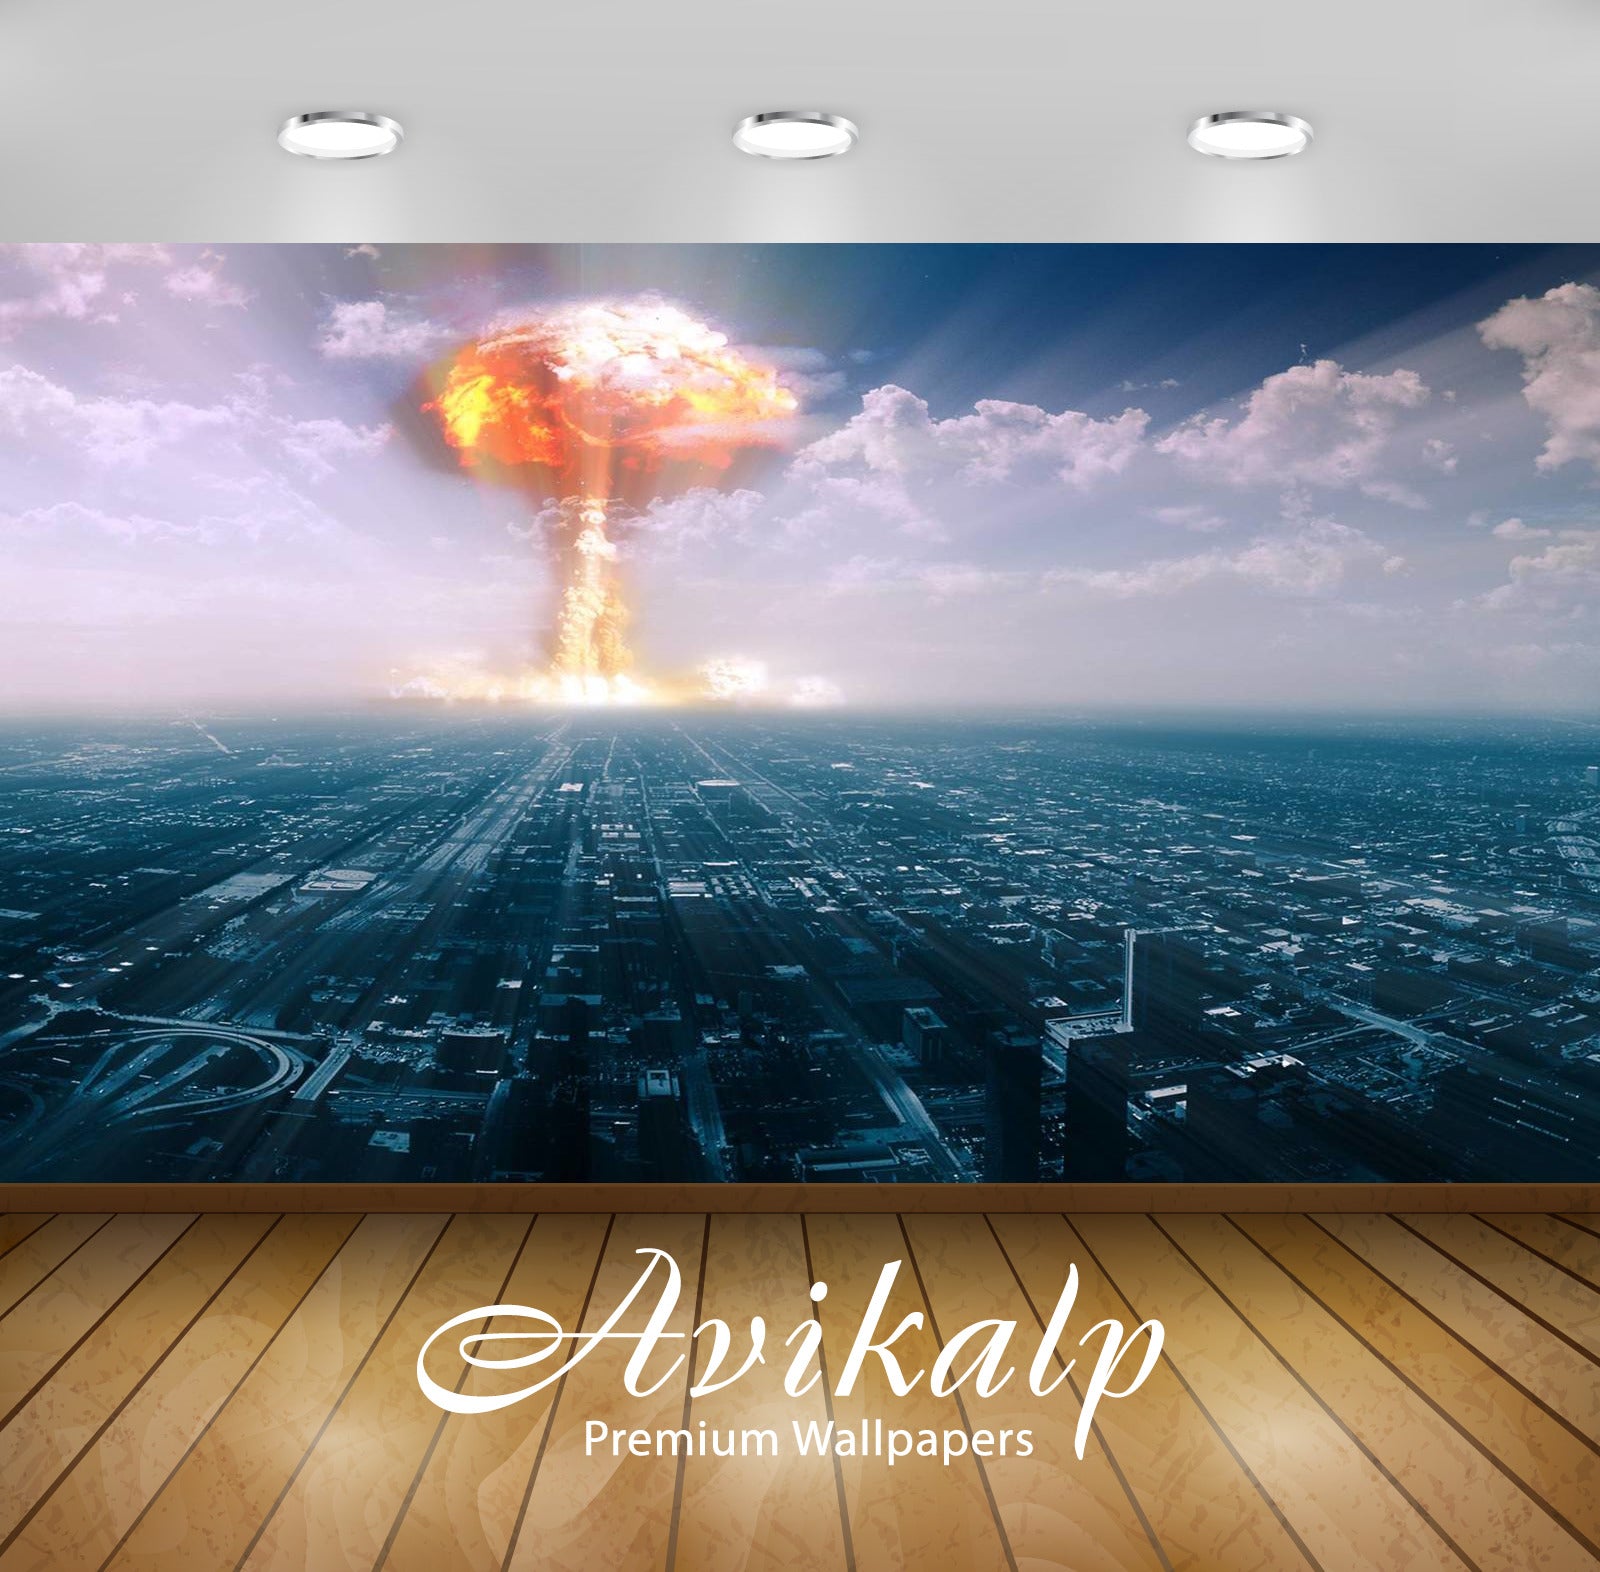 Avikalp Exclusive Nuclear AWI1170 HD Wallpapers for Living room, Hall, Kids Room, Kitchen, TV Backgr